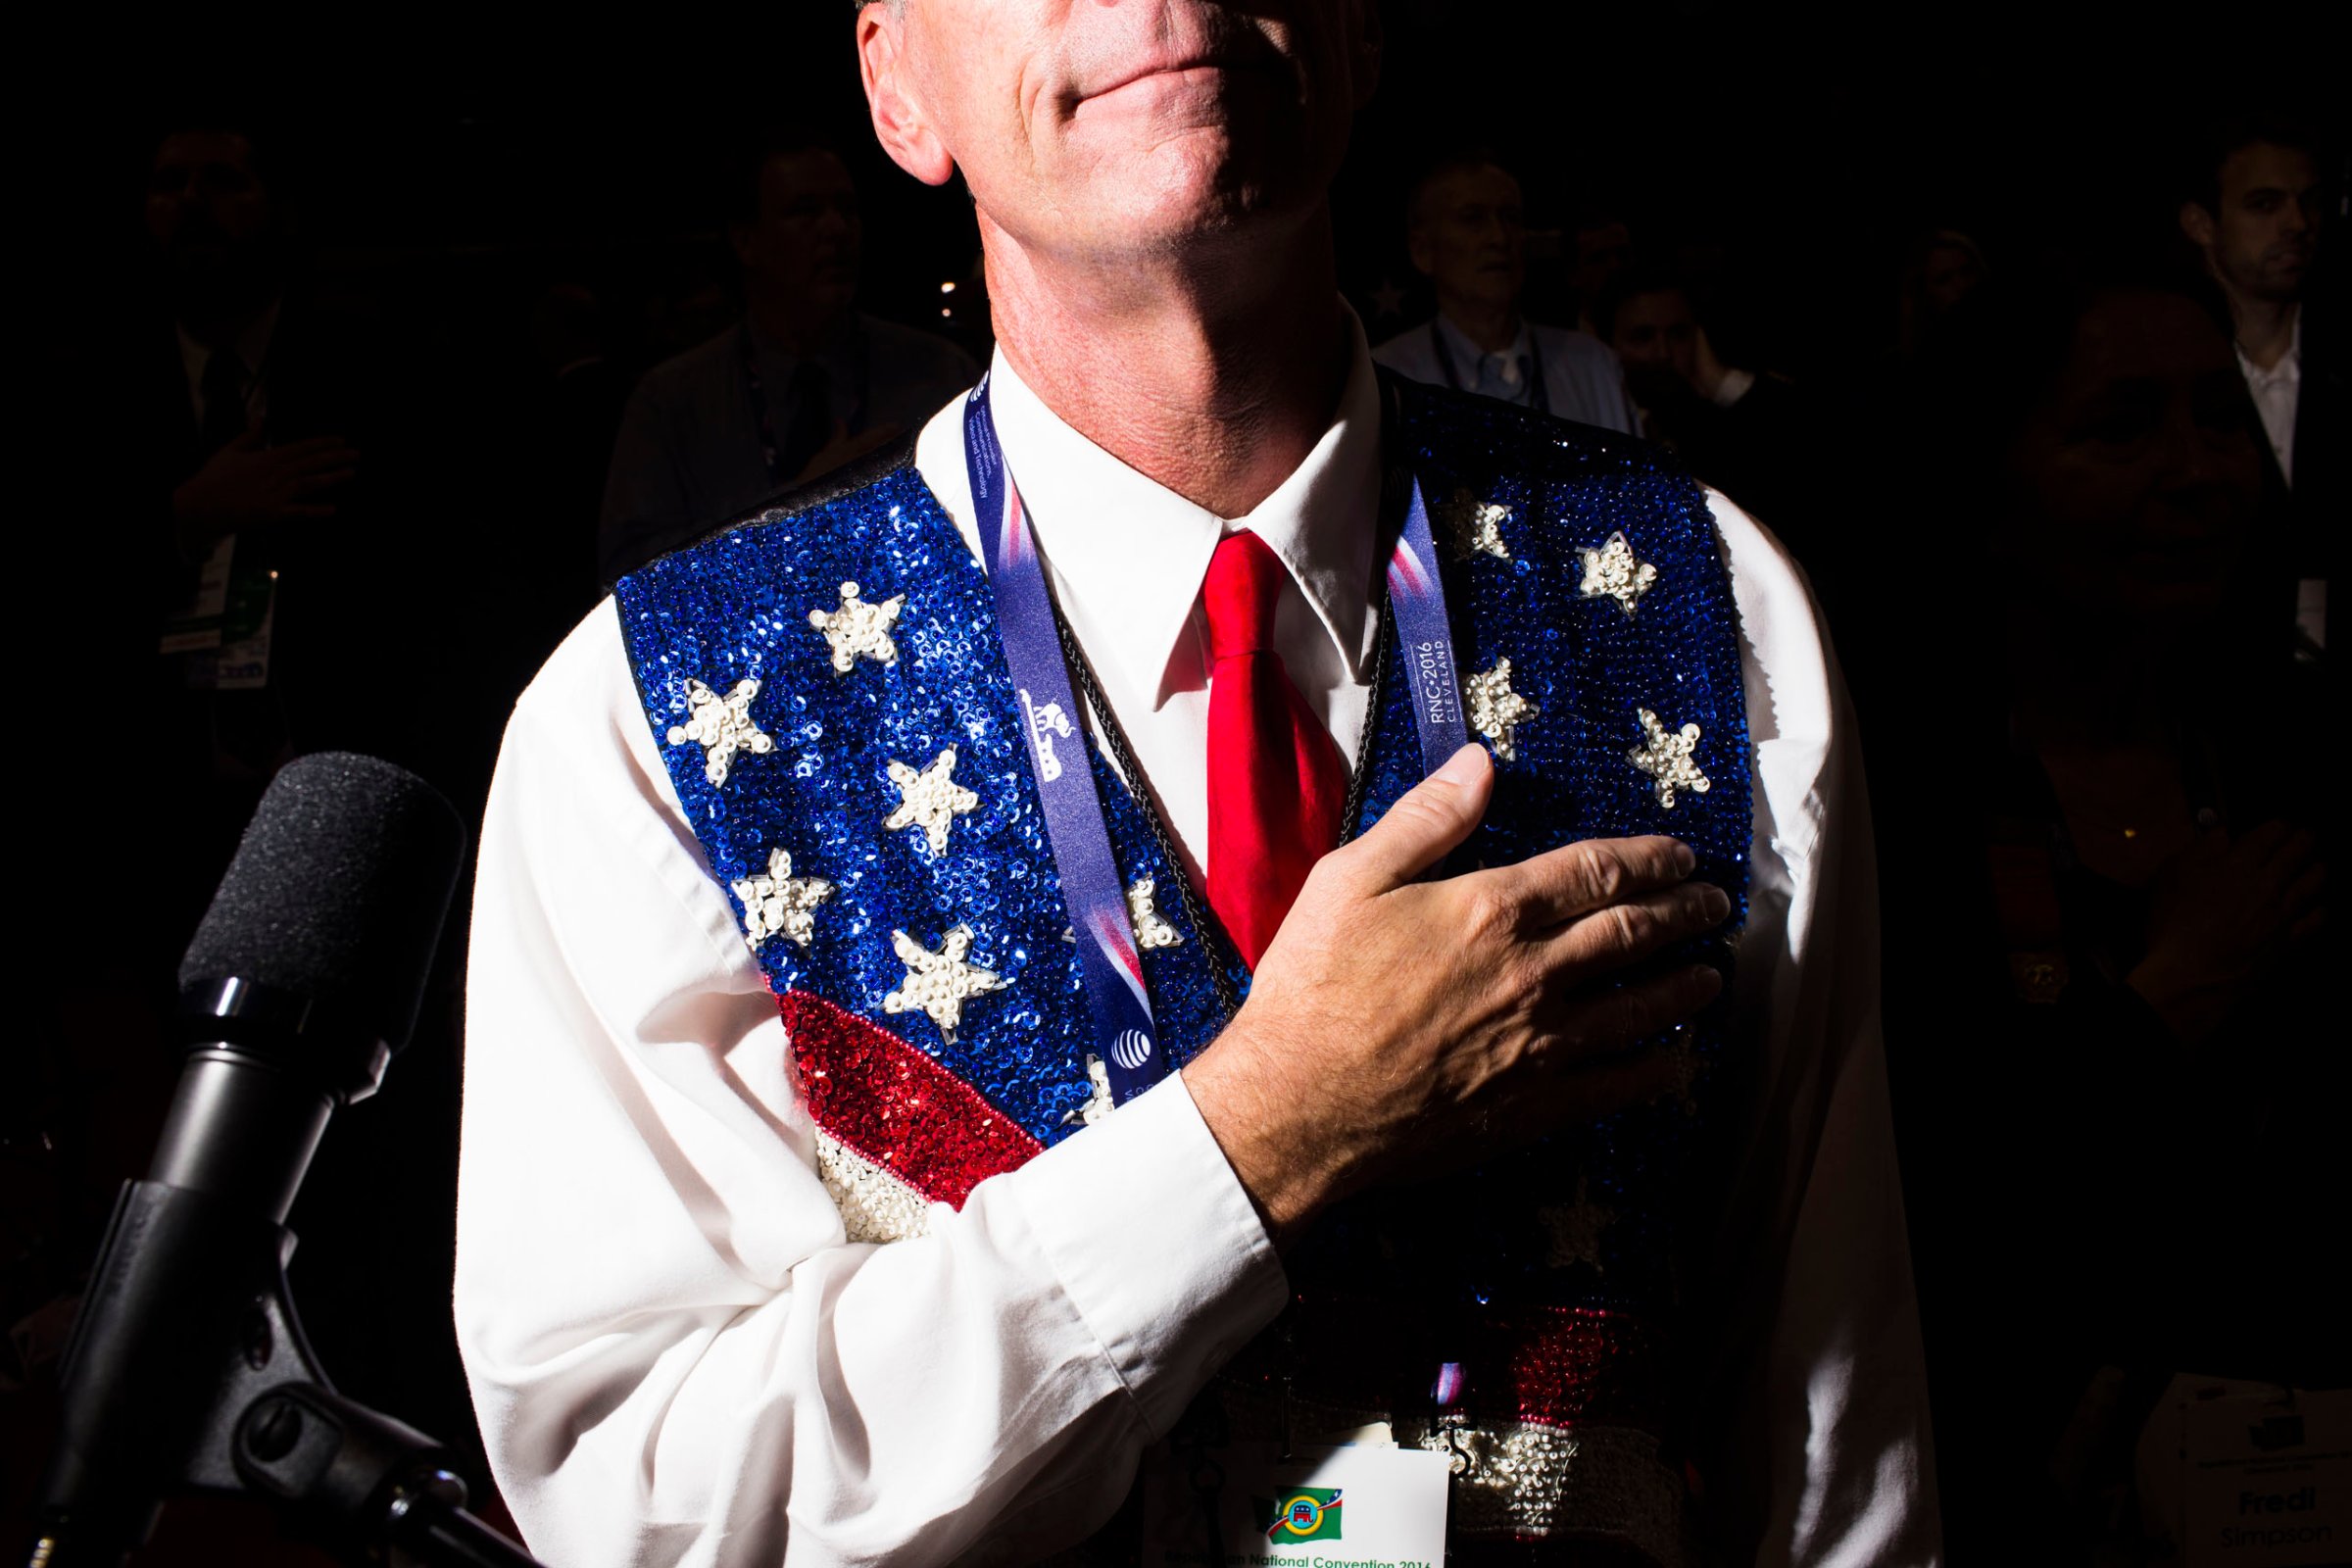 Photographer Landon Nordeman captures scenes from the floor of the 2016 Republican National Convention on Monday, July 18, 2016, in Cleveland, while on assignment for TIME. Here, a star-spangled, sequined vest makes a statement.